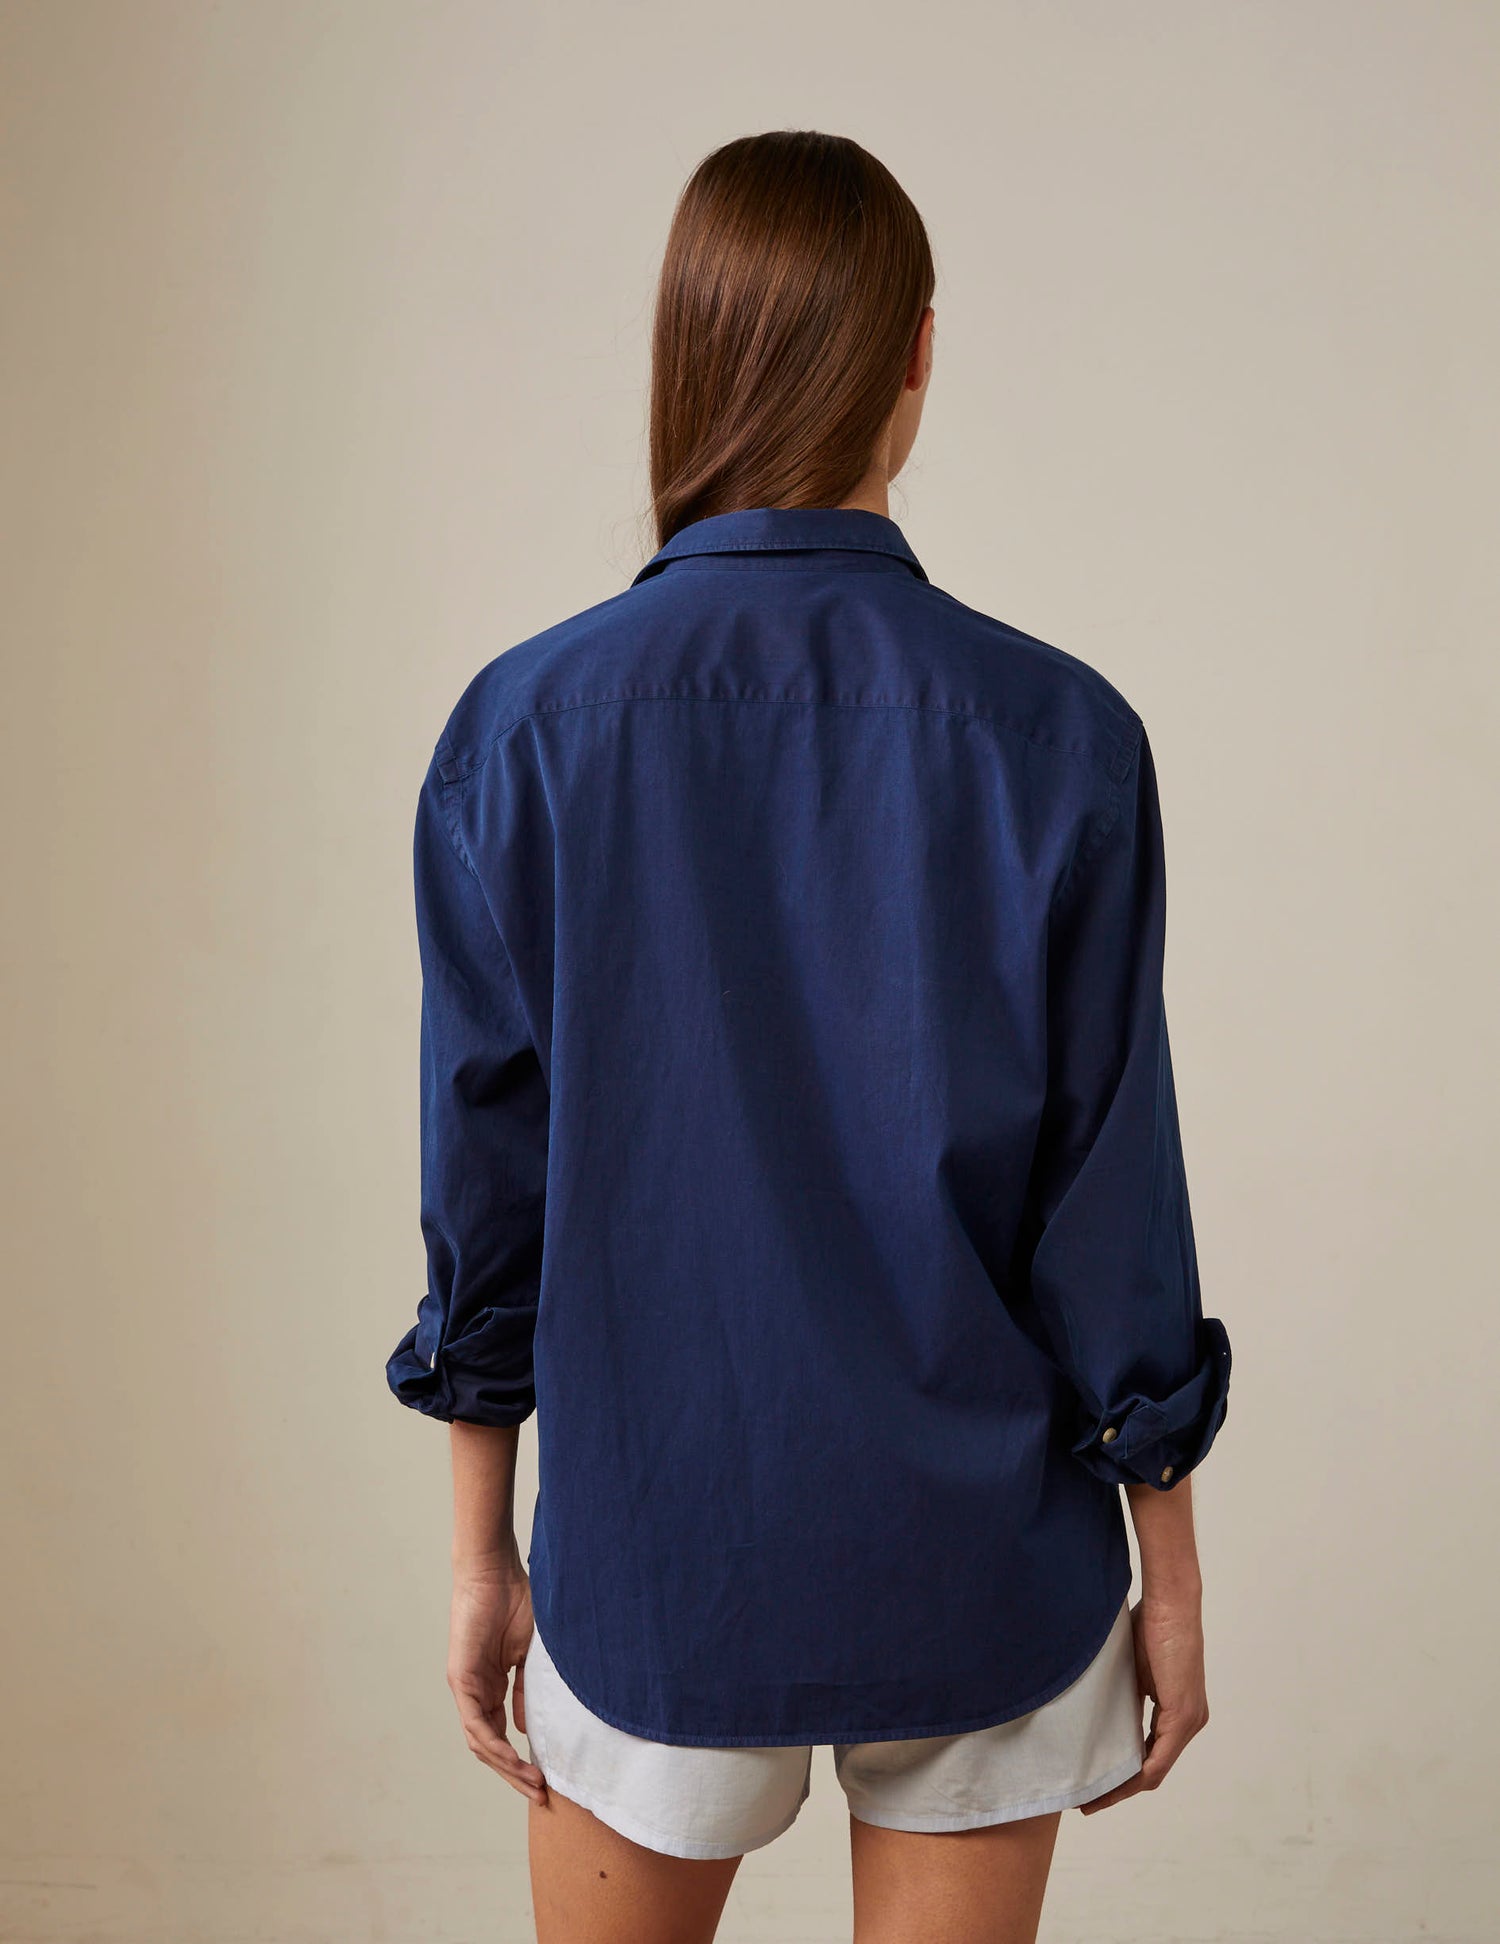 Denim "Je t'aime" shirt with red embroidery - Denim - Figaret Collar#6